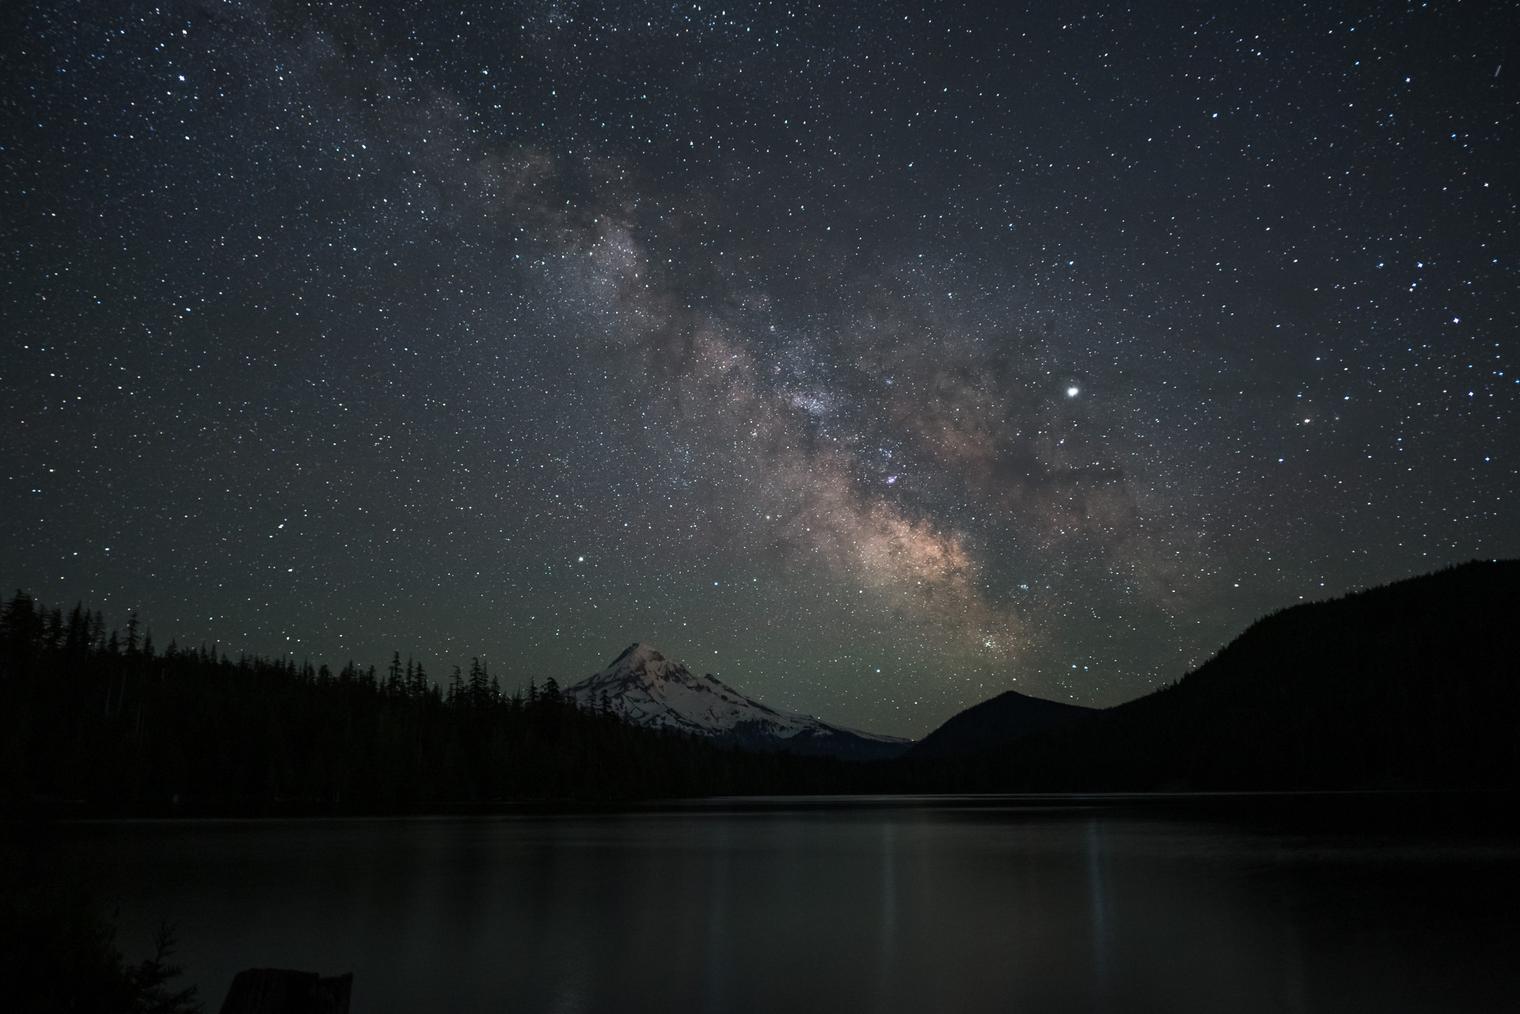 Lightroom Presets for Astro Photography (Milky Way and Lake)